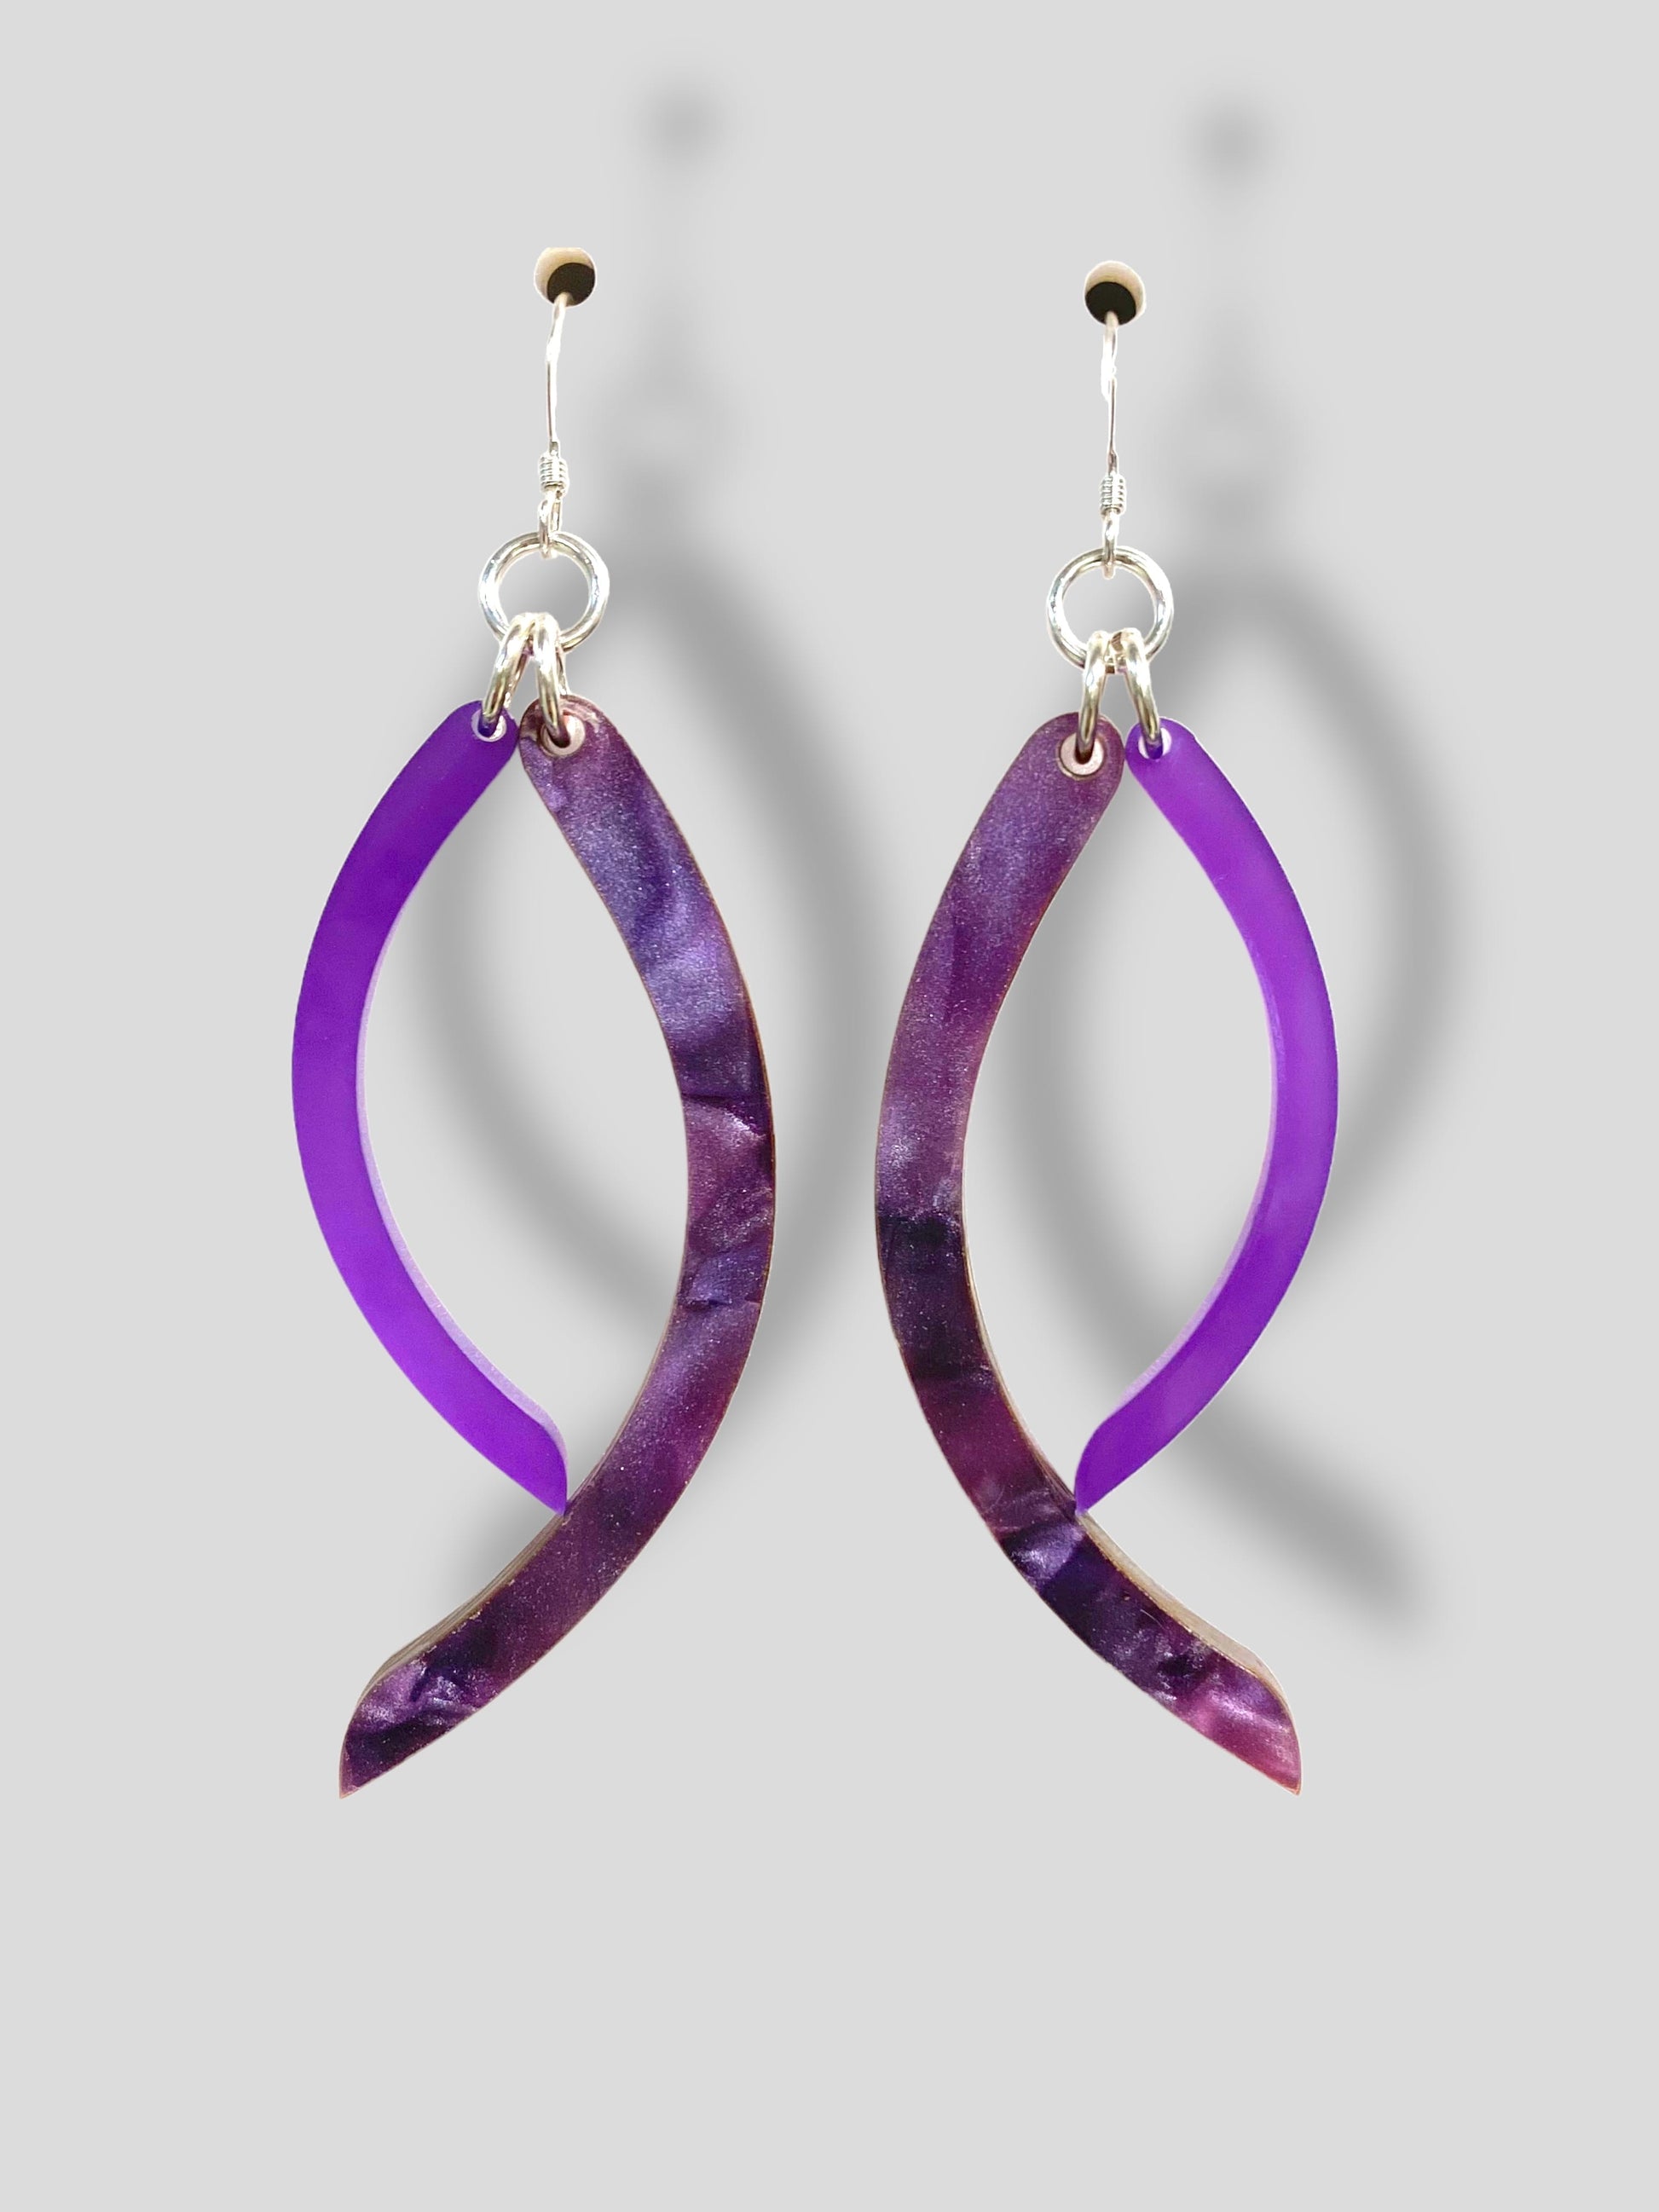 Curved Acrylics Earrings - Jewelry Making Kit